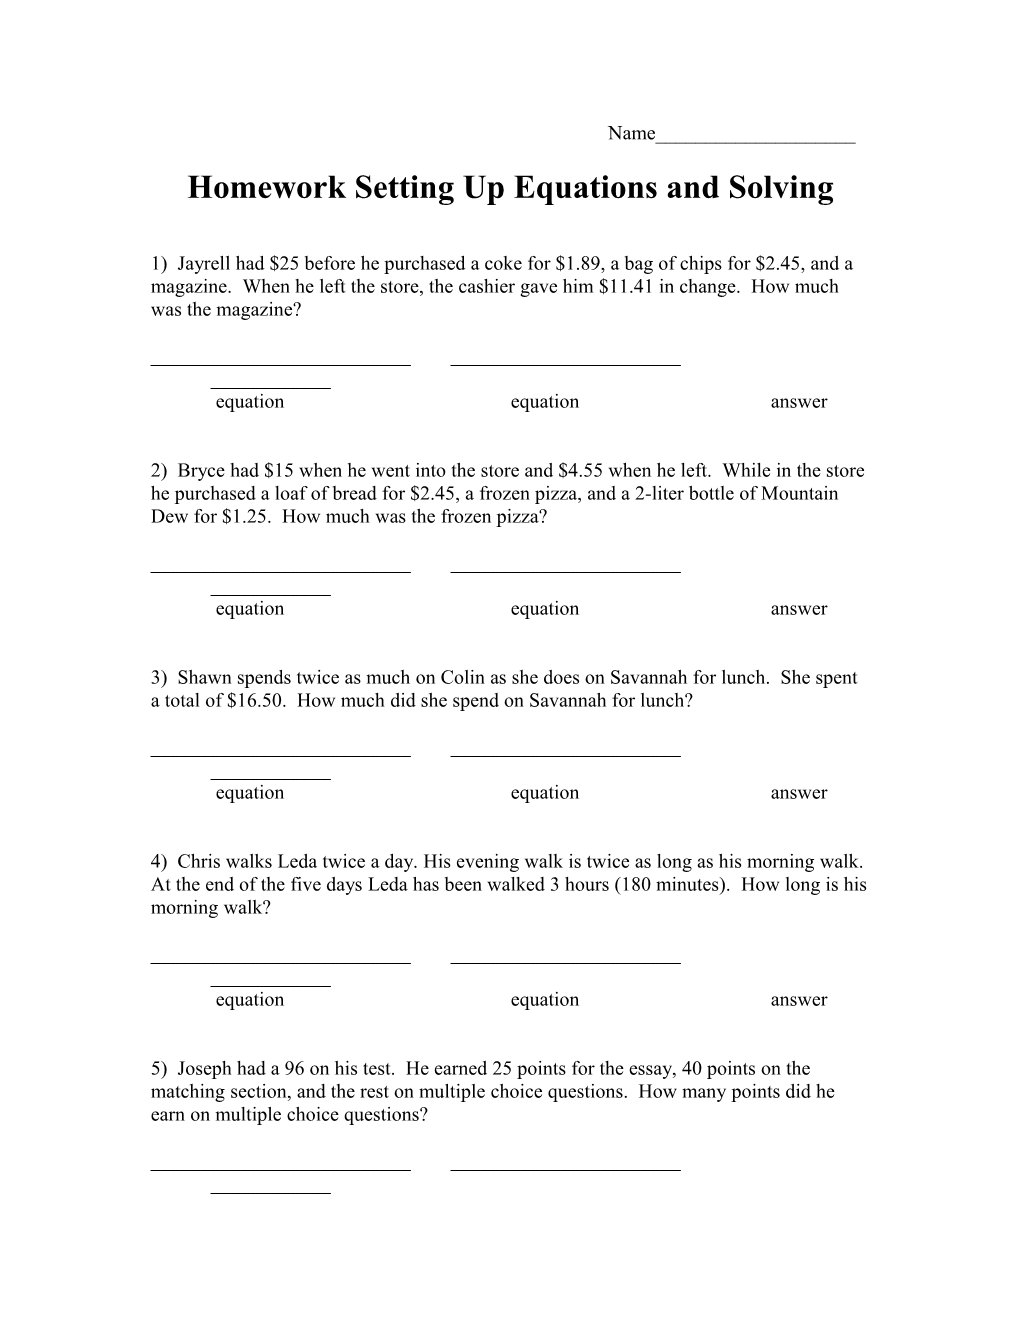 Homework Setting up Equations and Solving